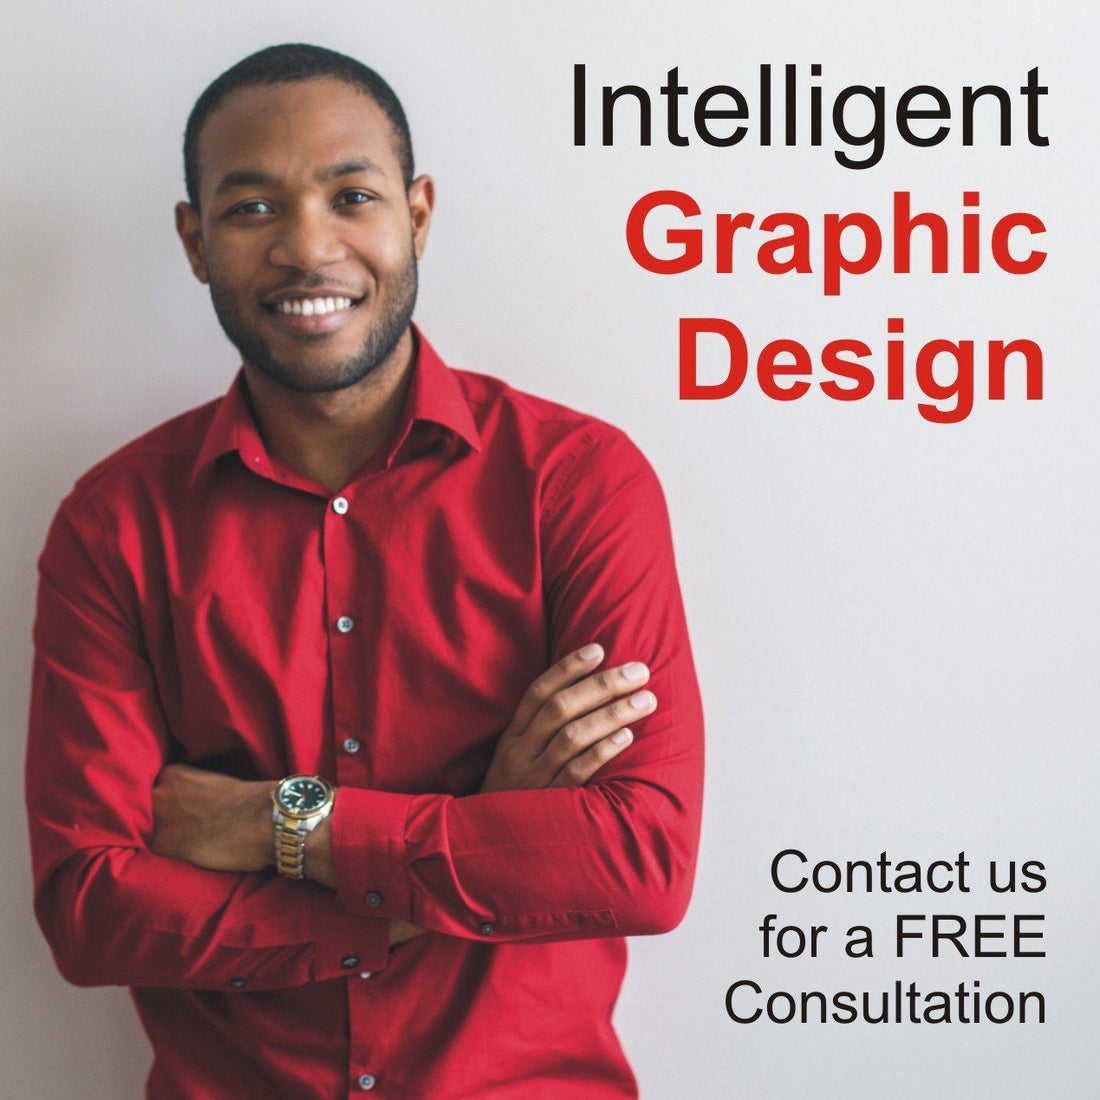 Do you need a Professional Graphic Design Service?